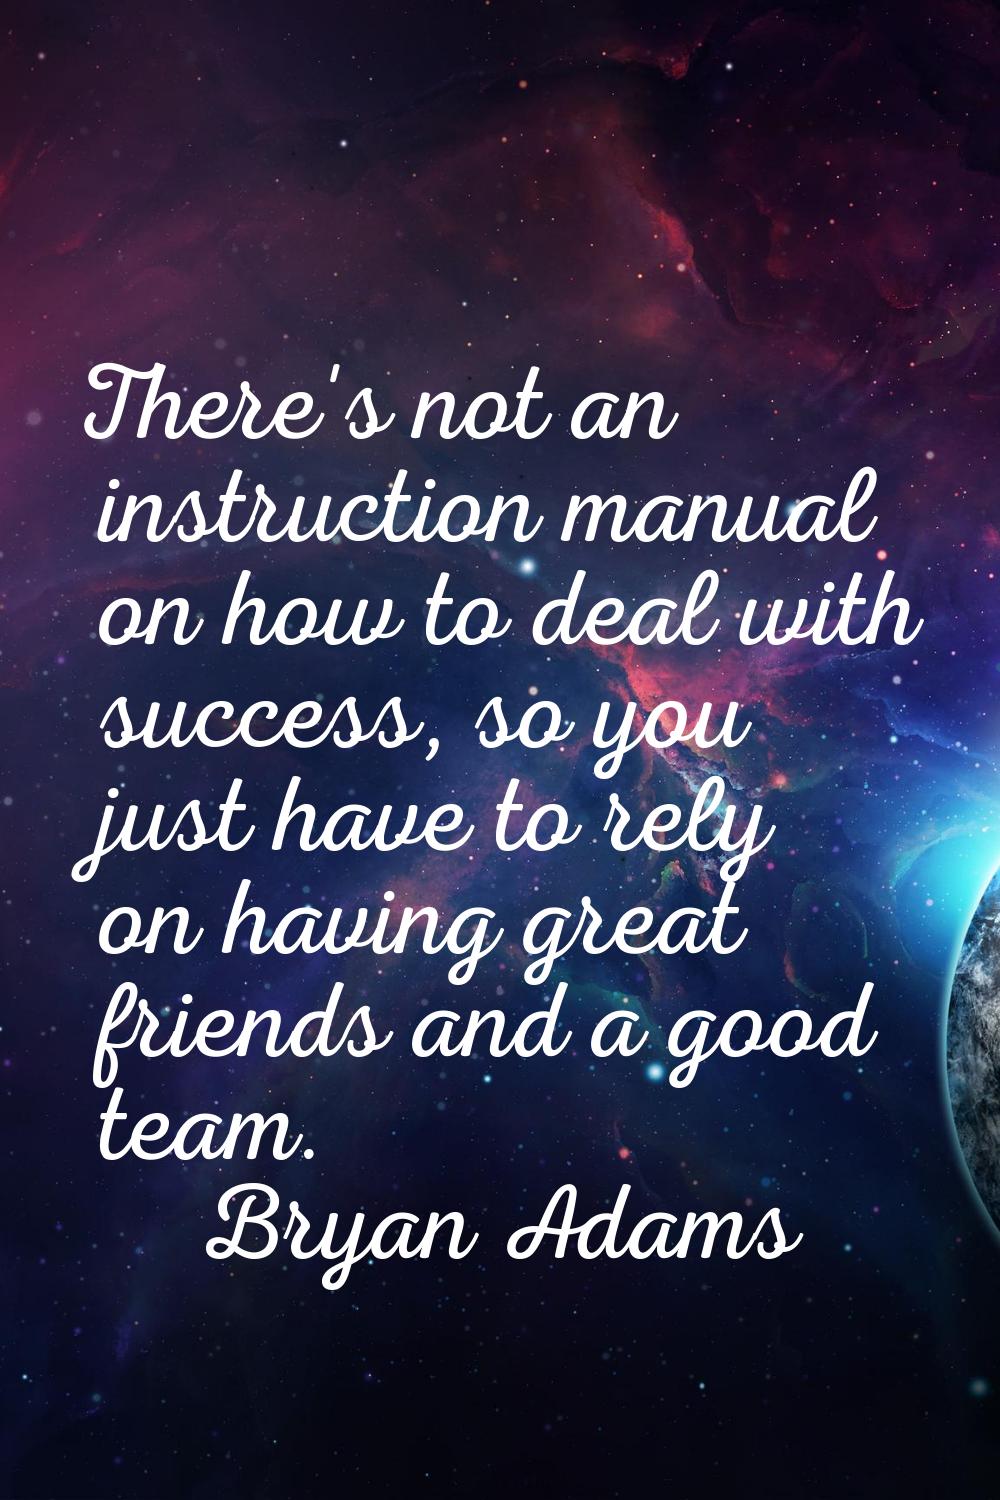 There's not an instruction manual on how to deal with success, so you just have to rely on having g